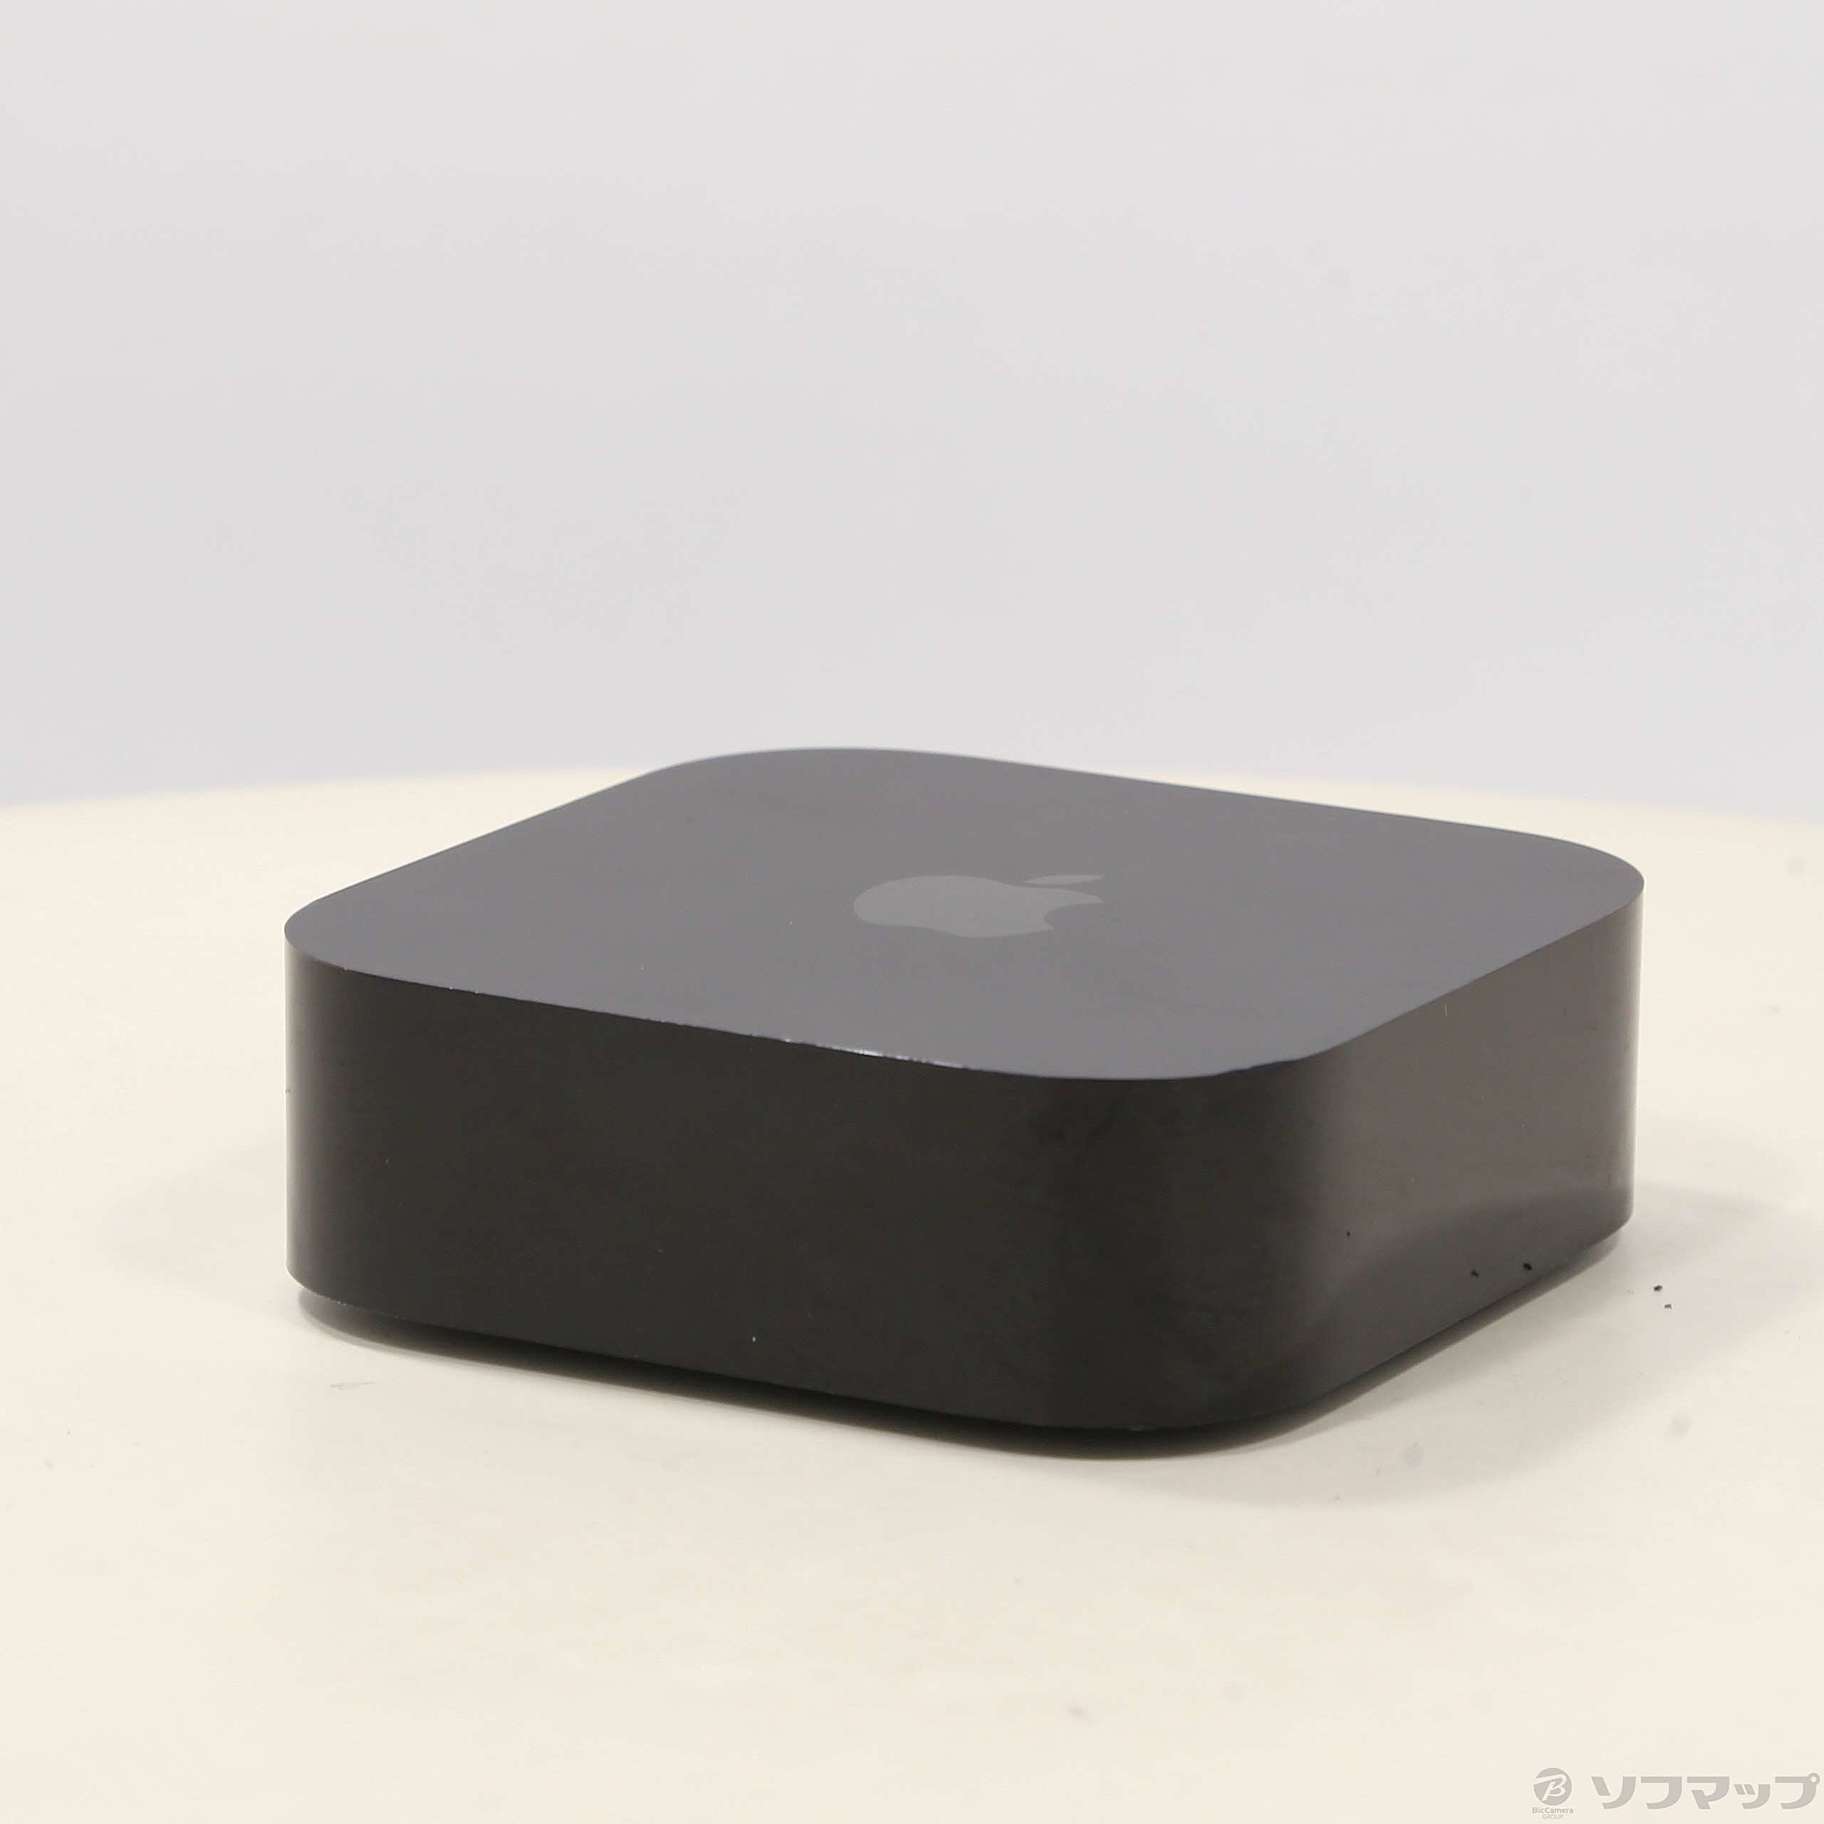 中古】Apple TV 4K 第3世代 64GB Wi-Fiモデル MN873J／A ...